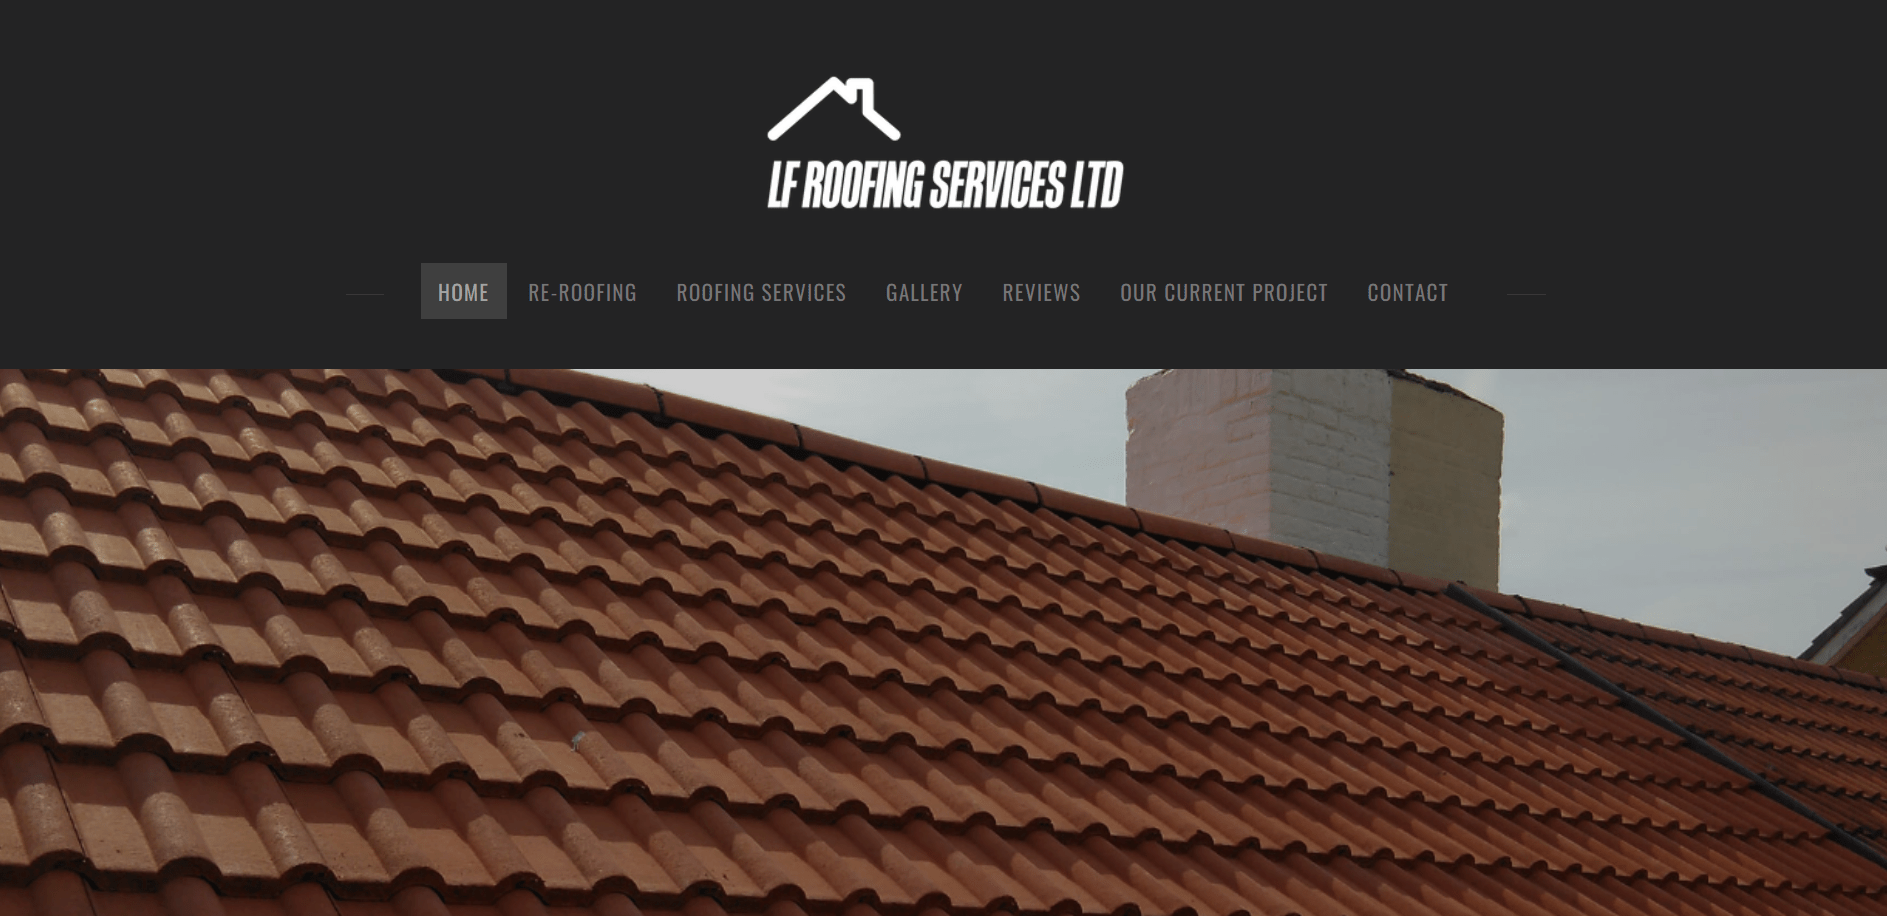 LF Roofing Services